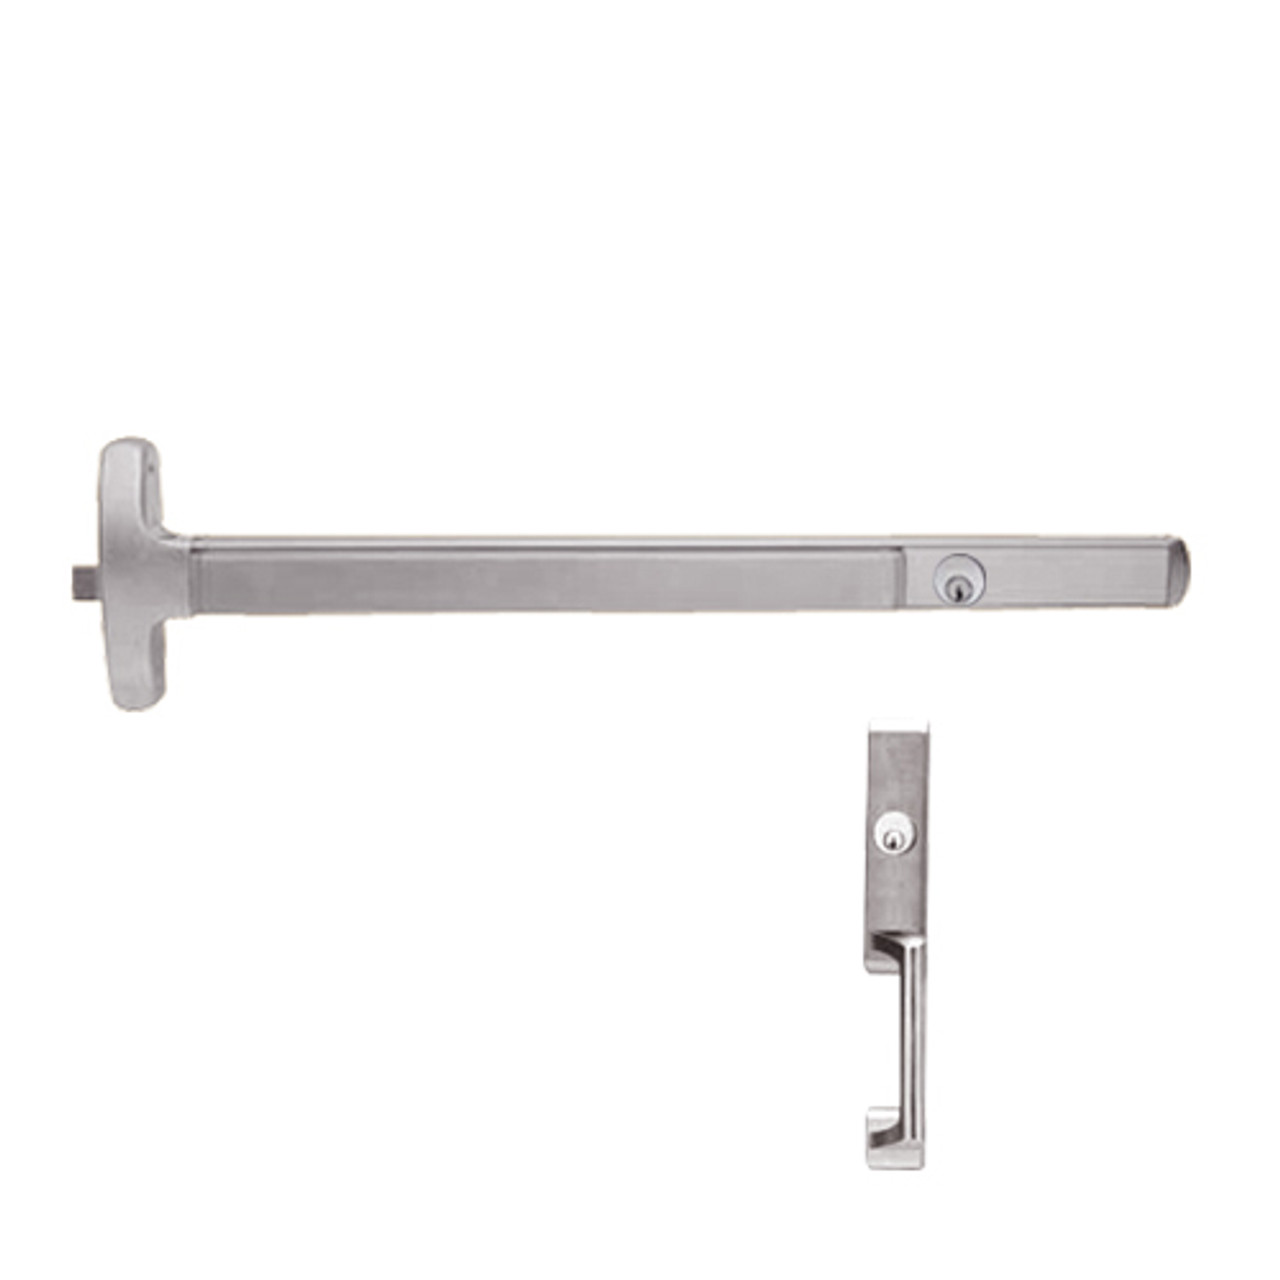 CD24-R-NL-US28-4-LHR Falcon Exit Device in Anodized Aluminum